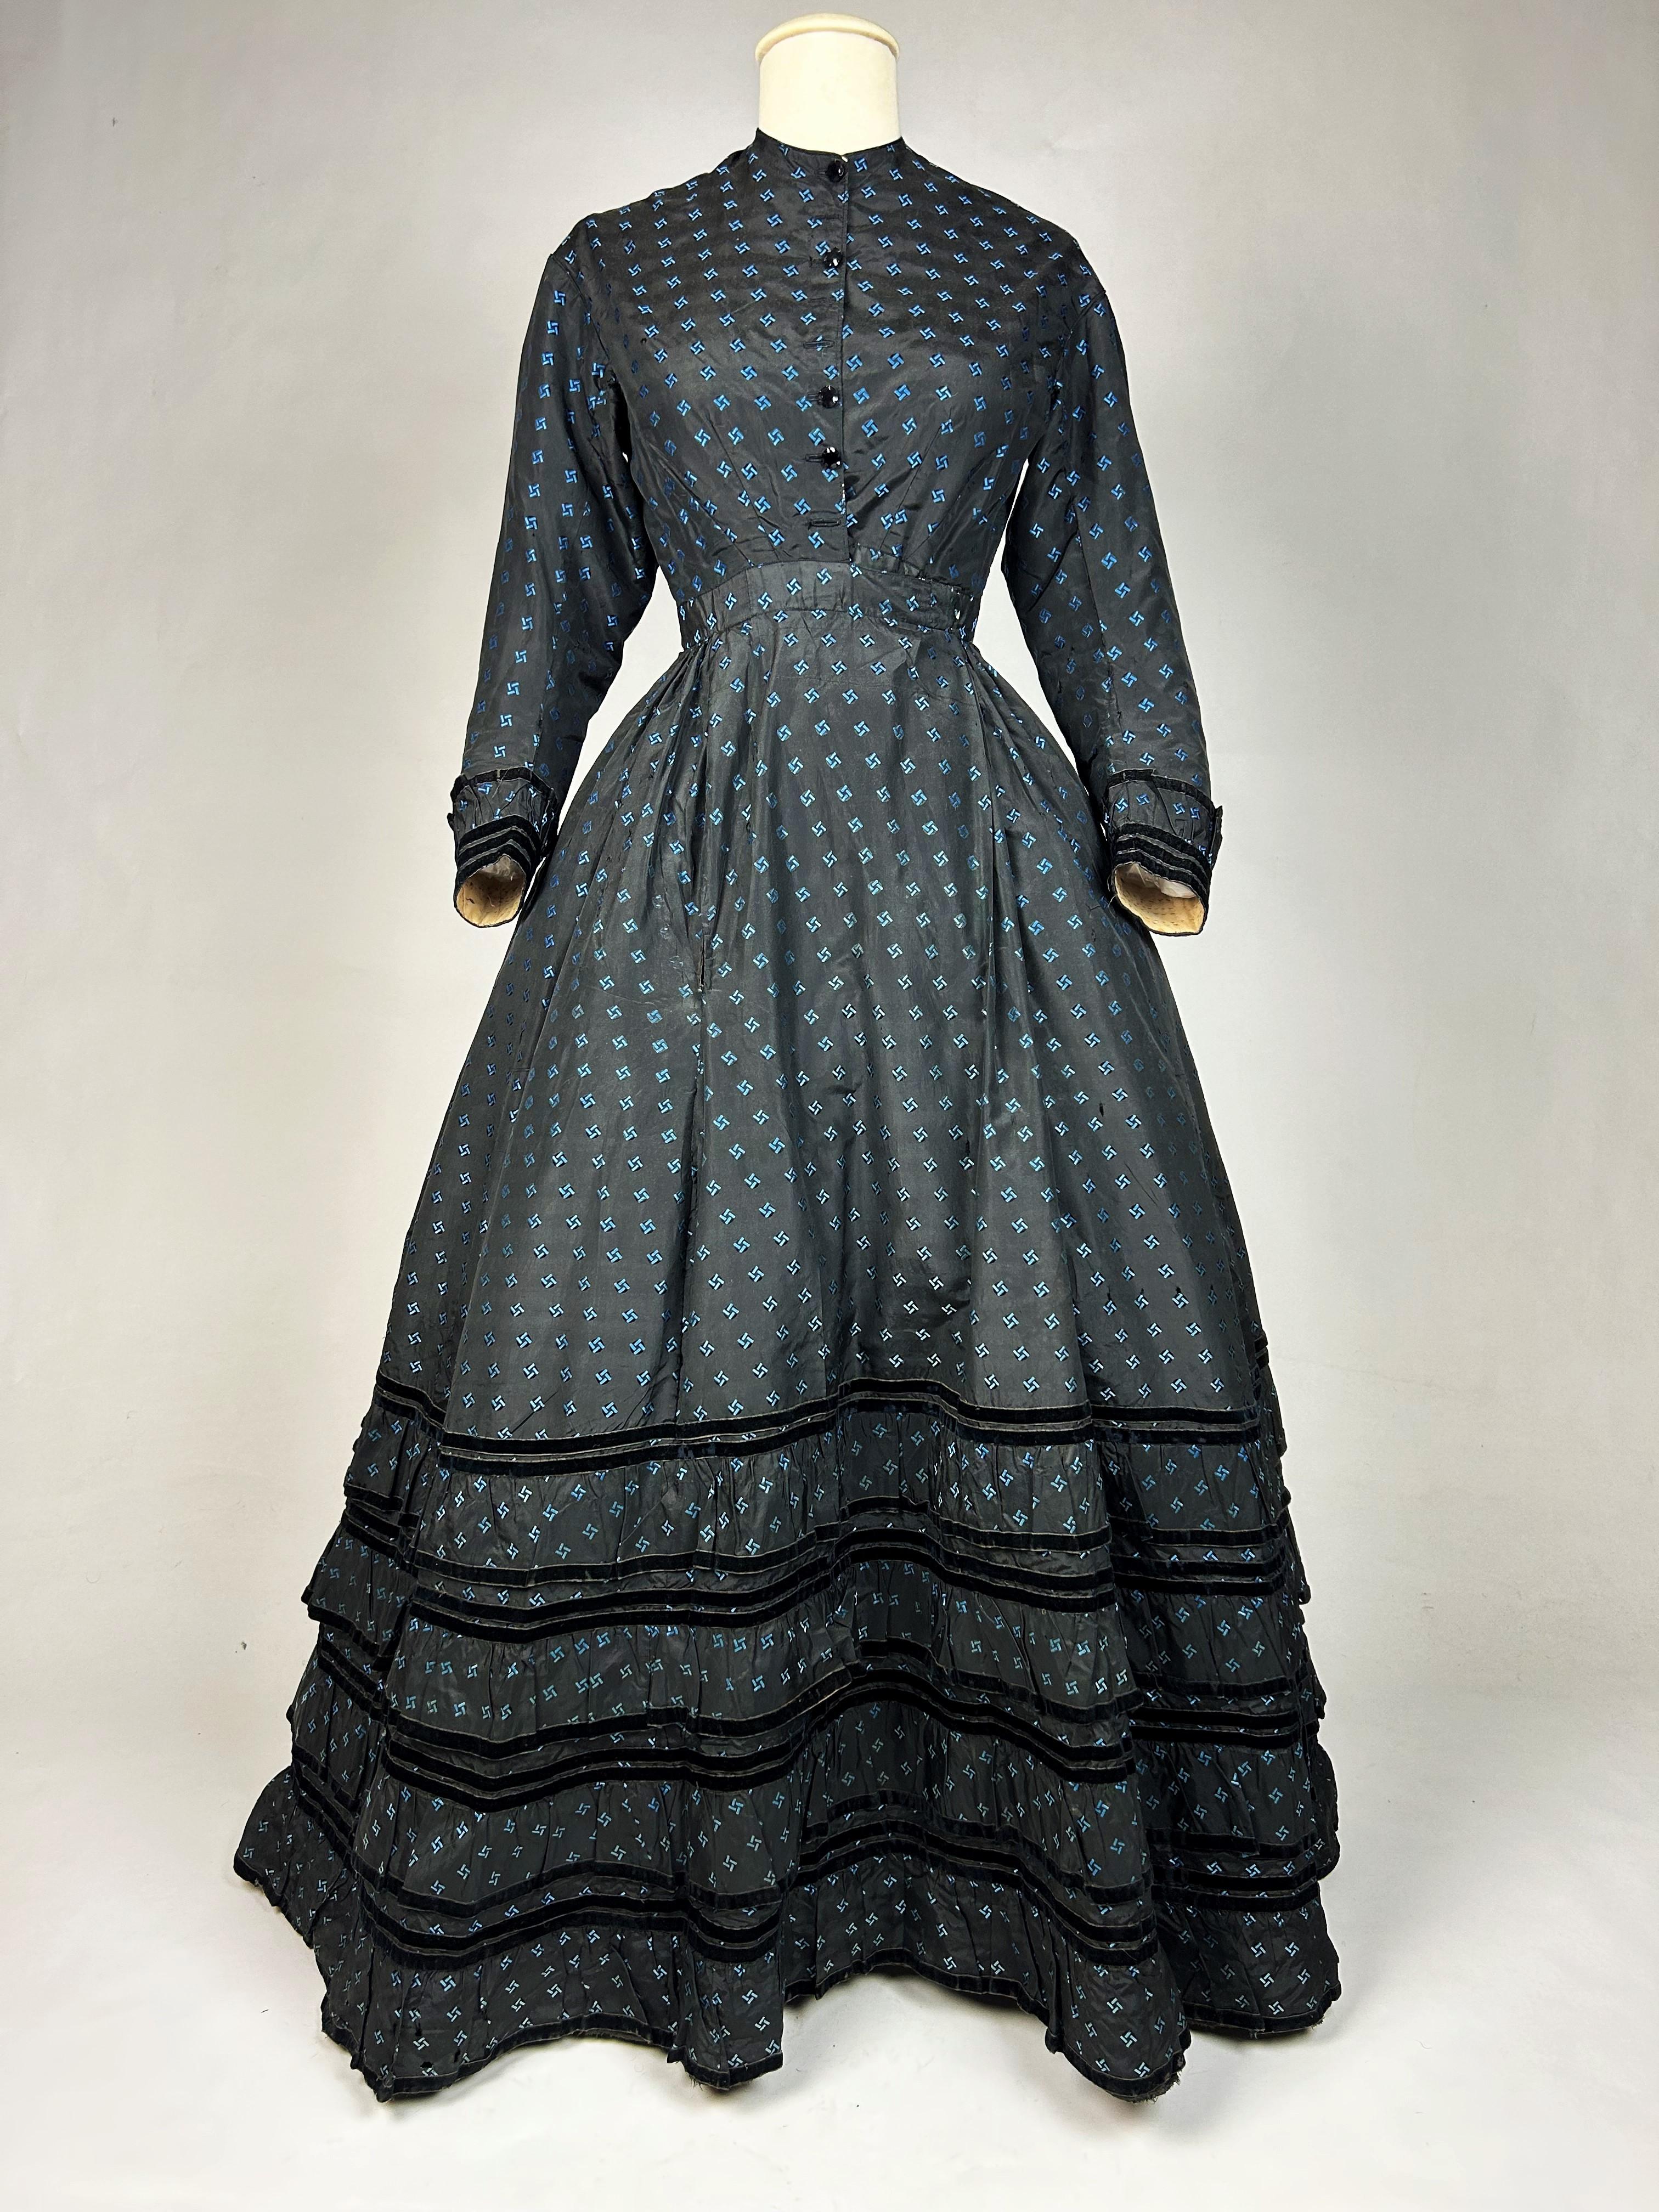 Circa 1870
France

Elegant Second Empire Crinoline day dress in black brocaded taffeta edged with blue geometric diamonds. Fitted bodice, crew neck, bent sleeves and front closure with black glass buttons (four buttons missing). Skirt with large